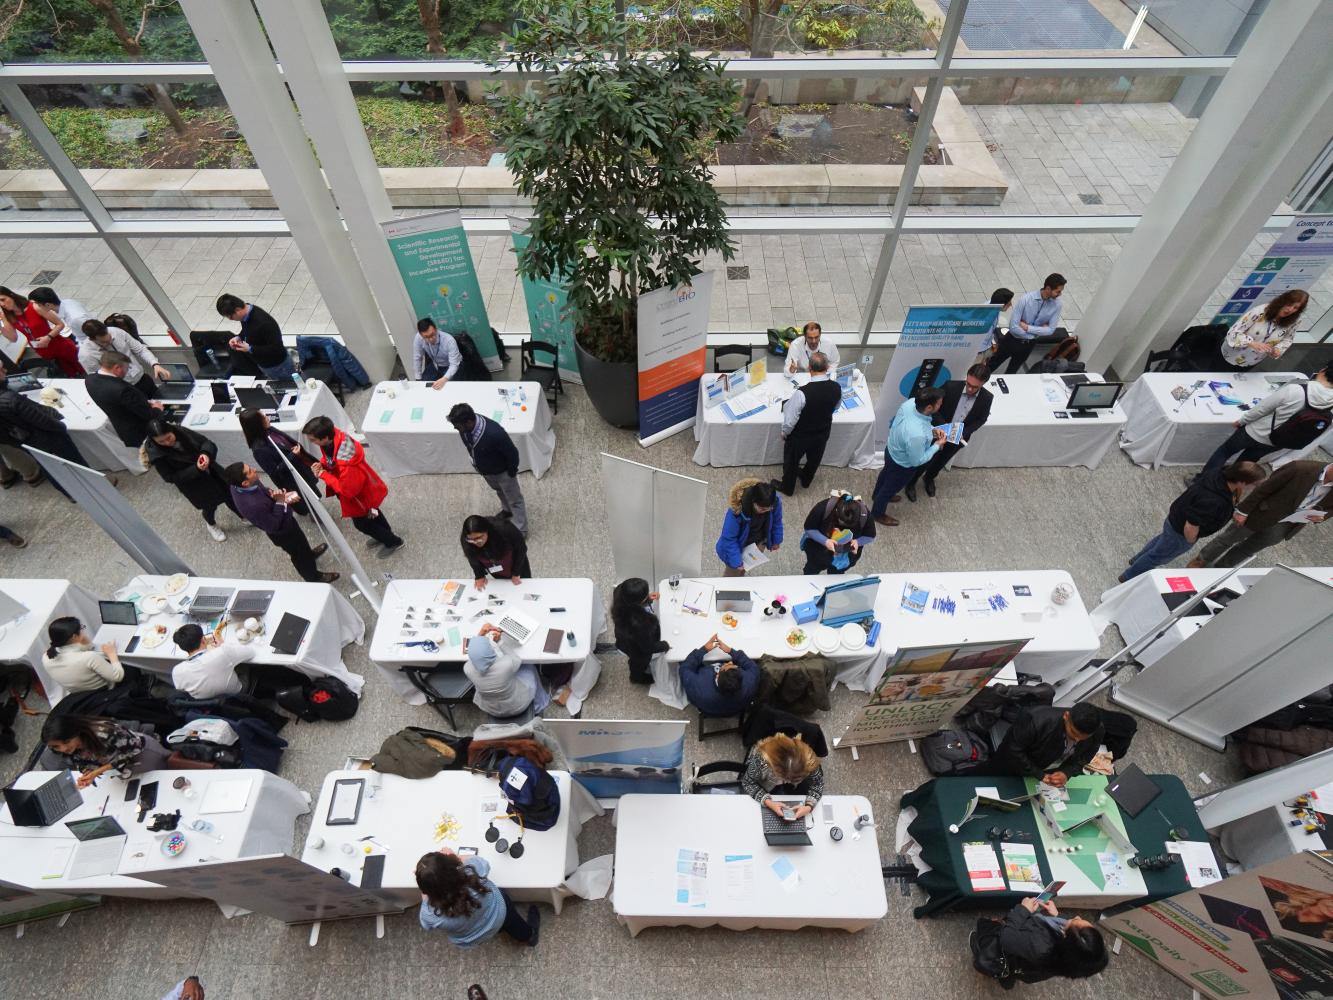 Birdseye view of students studying